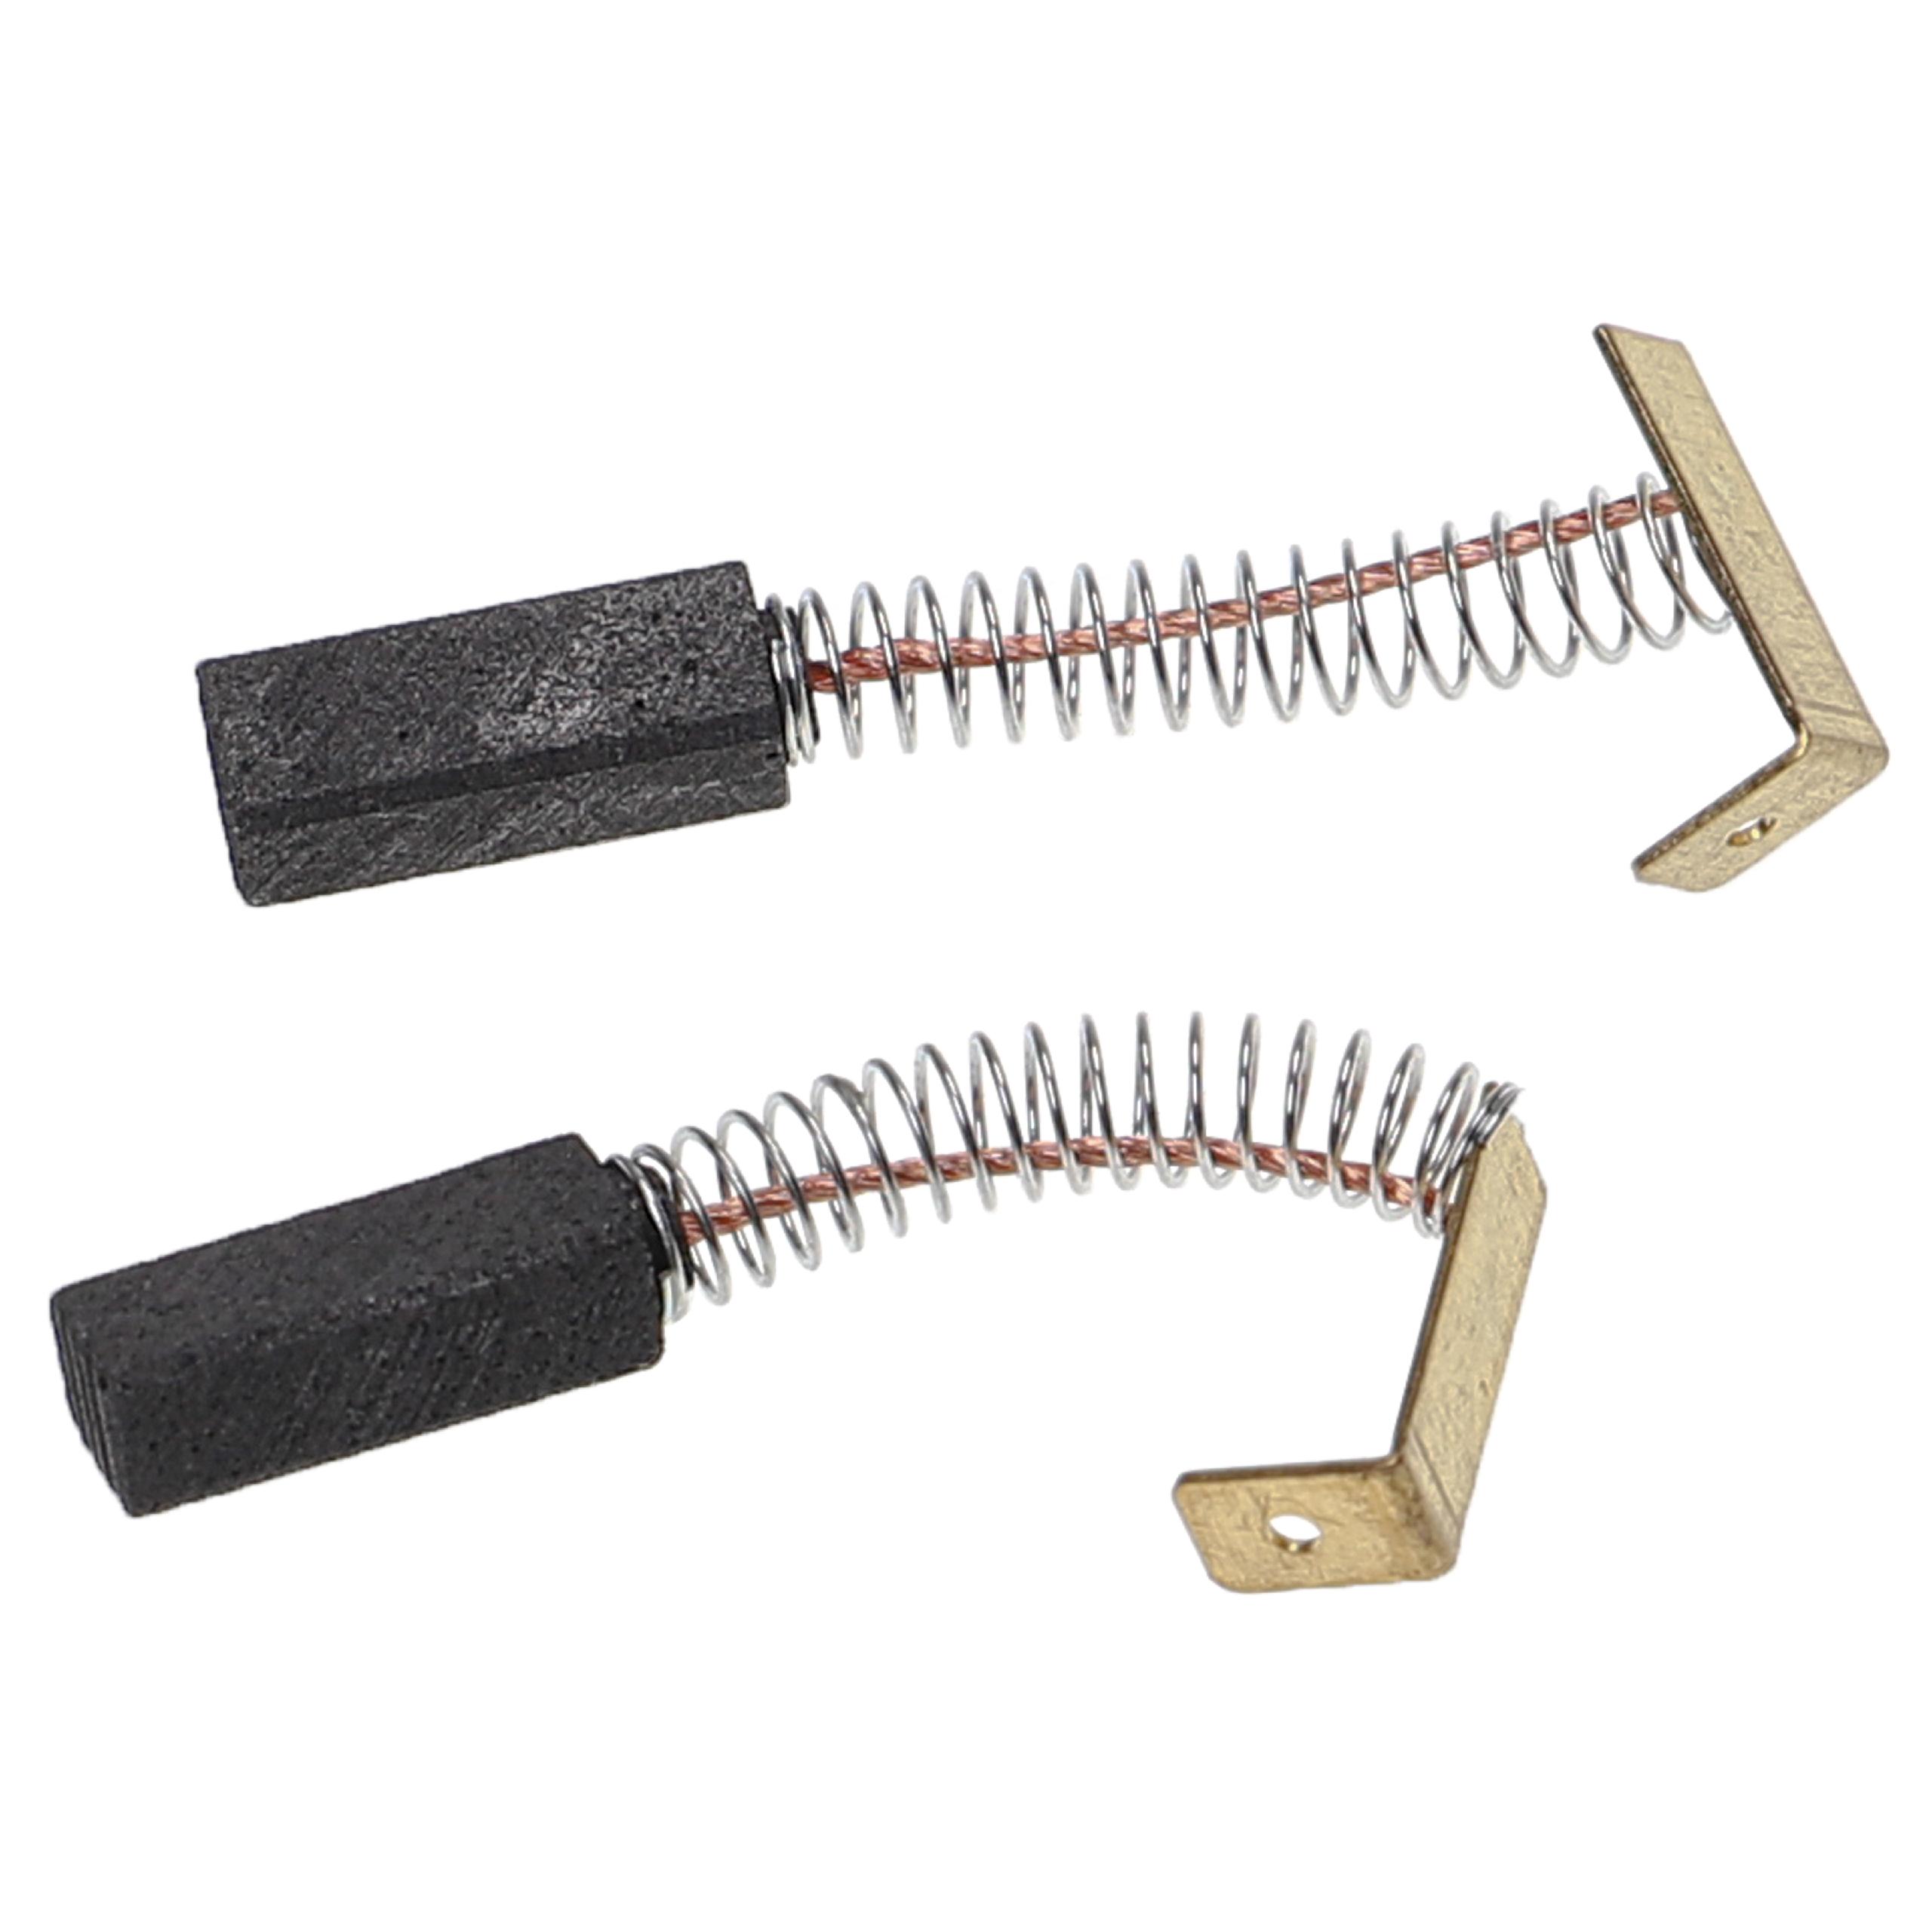 2x Carbon Brush as Replacement for Fein 30711059007 Electric Power Tools + Spring, 5 x 6.4 x 16.9mm